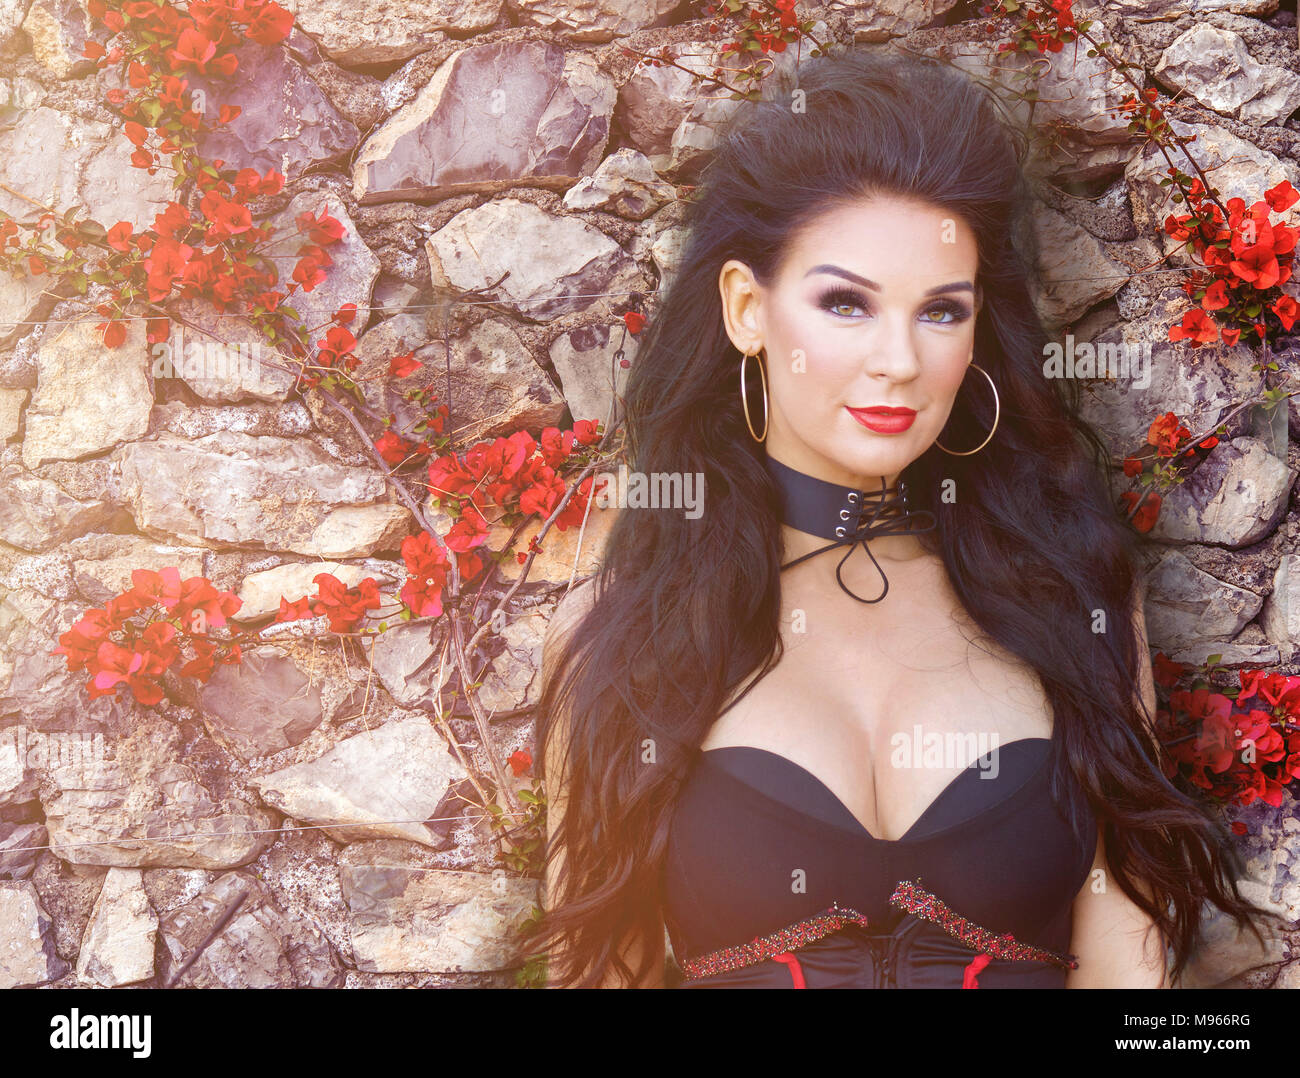 Beautiful Spanish woman against a rock wall with brilliant red bougainvillea flowers surrounding her Stock Photo